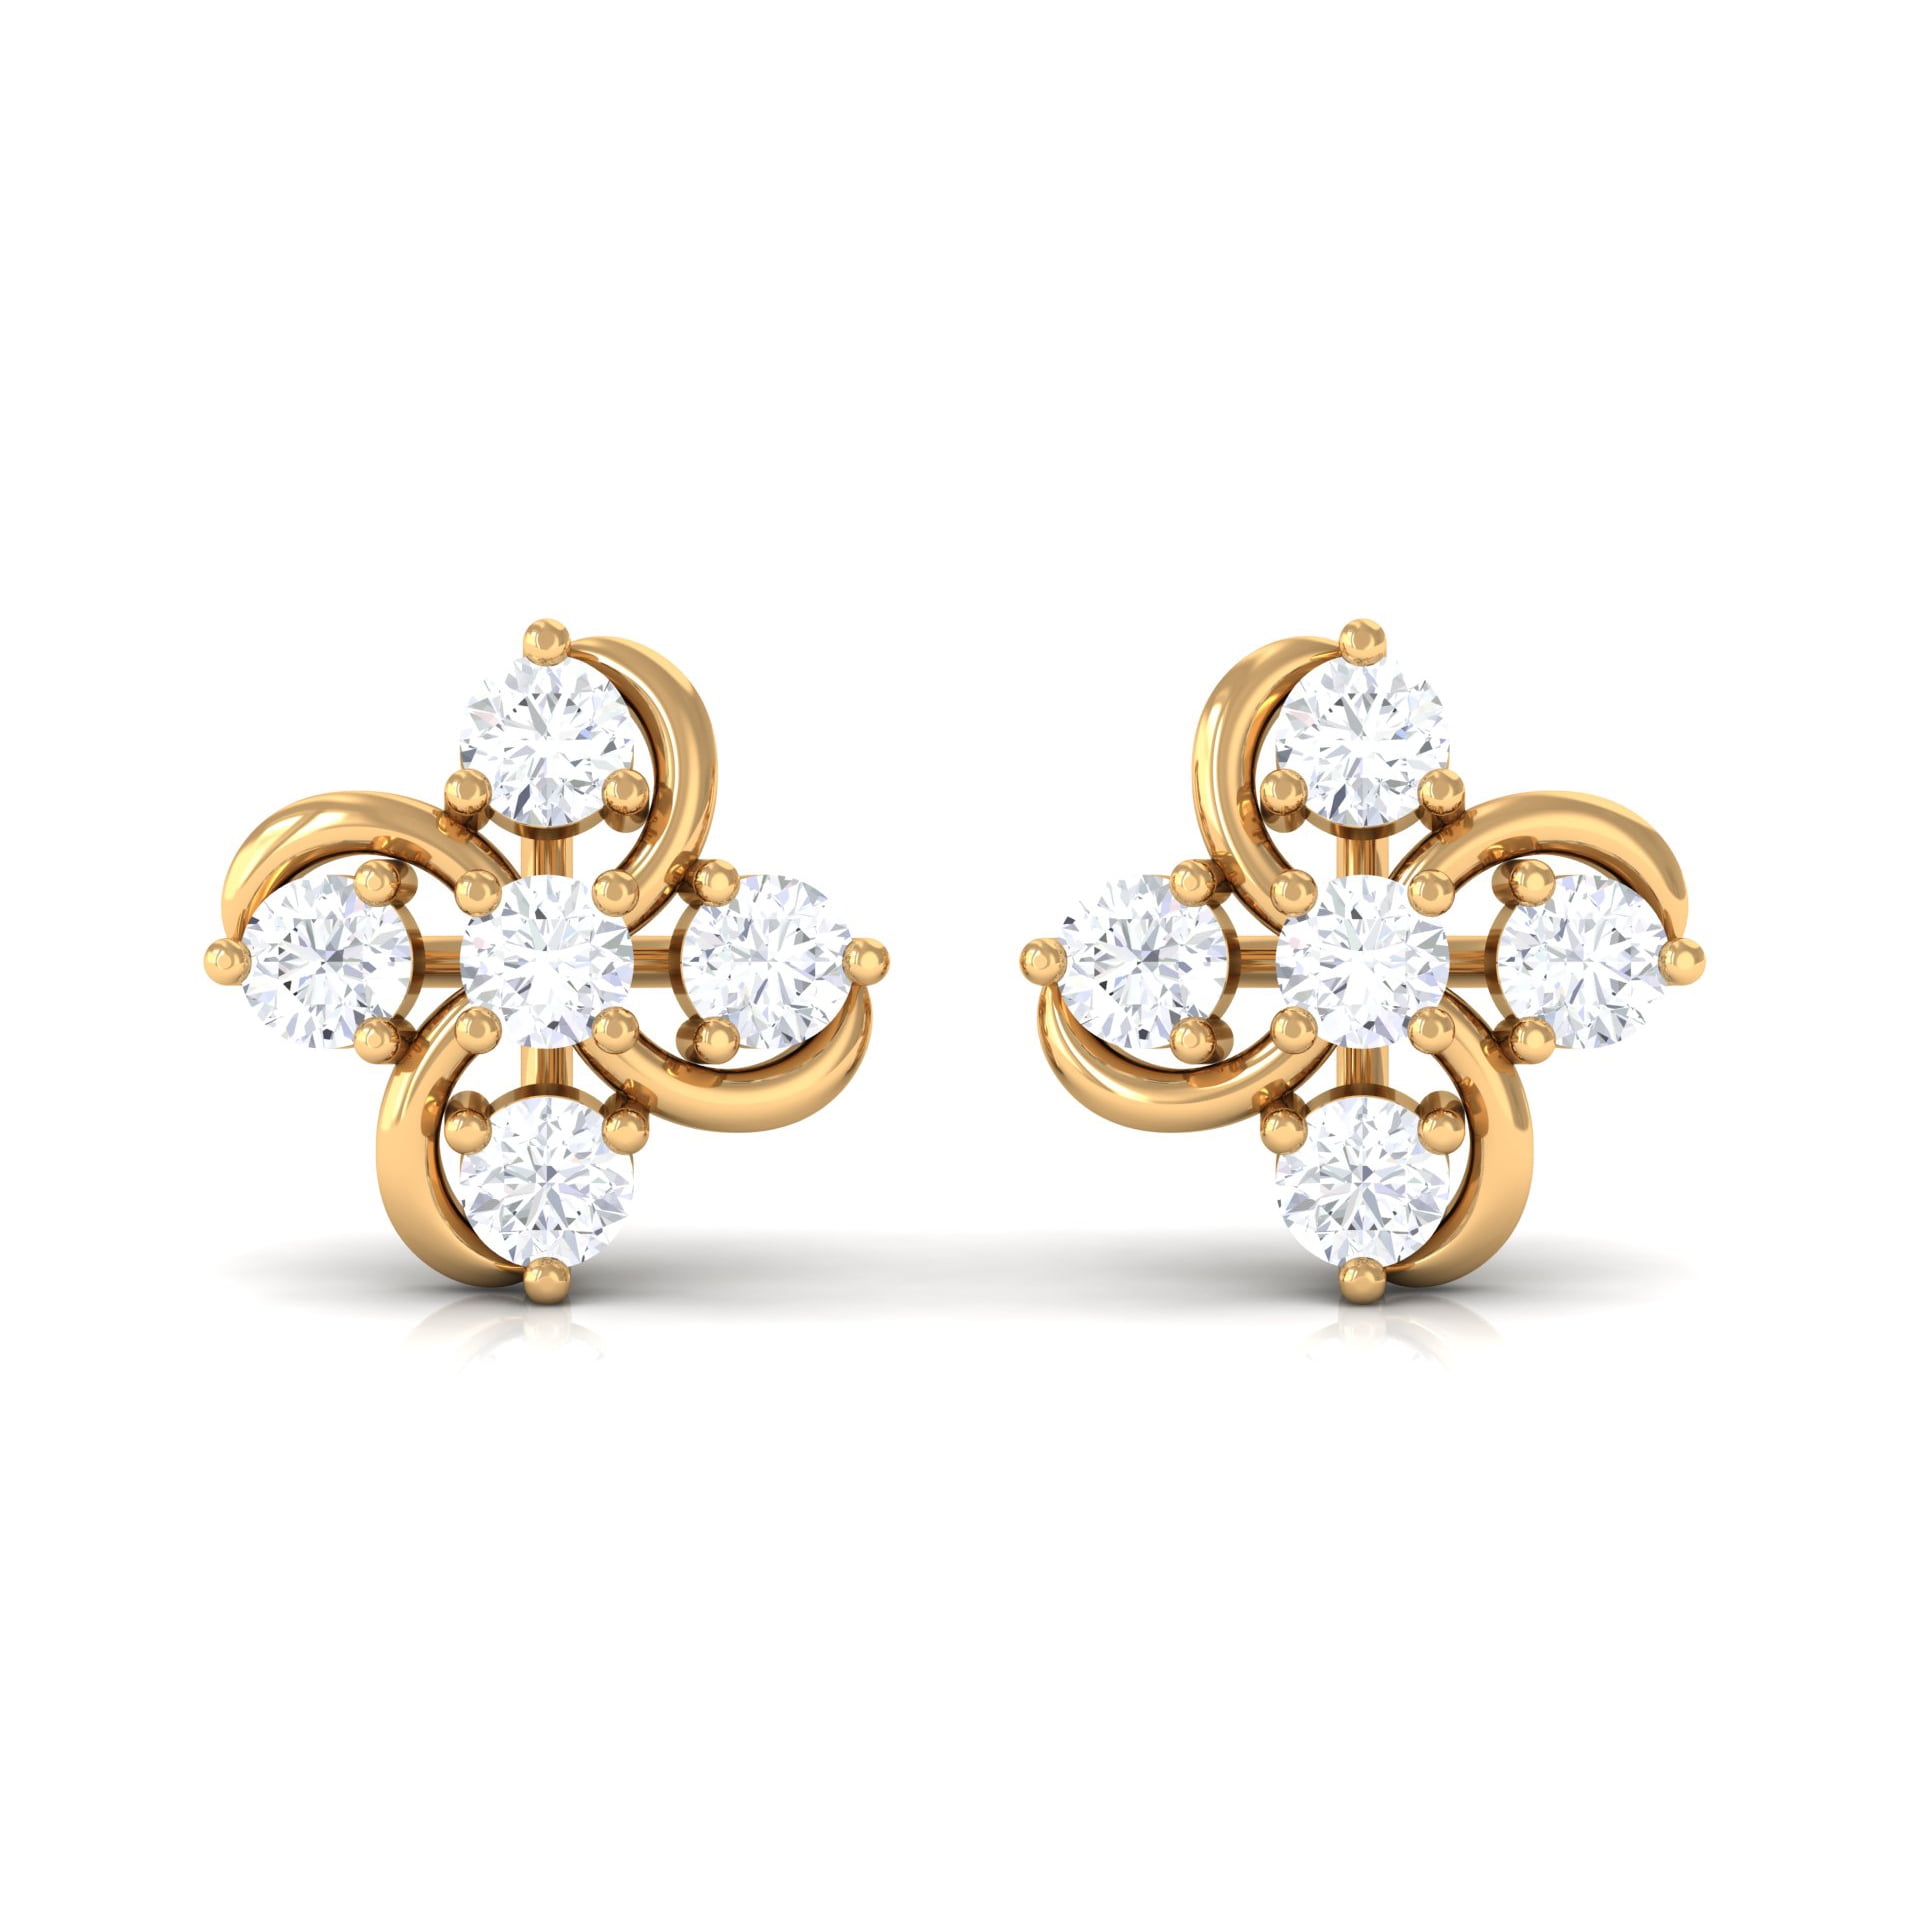 The Gilberta Diamond Earrings - Diamond Earrings at Best Prices in India |  SarvadaJewels.com